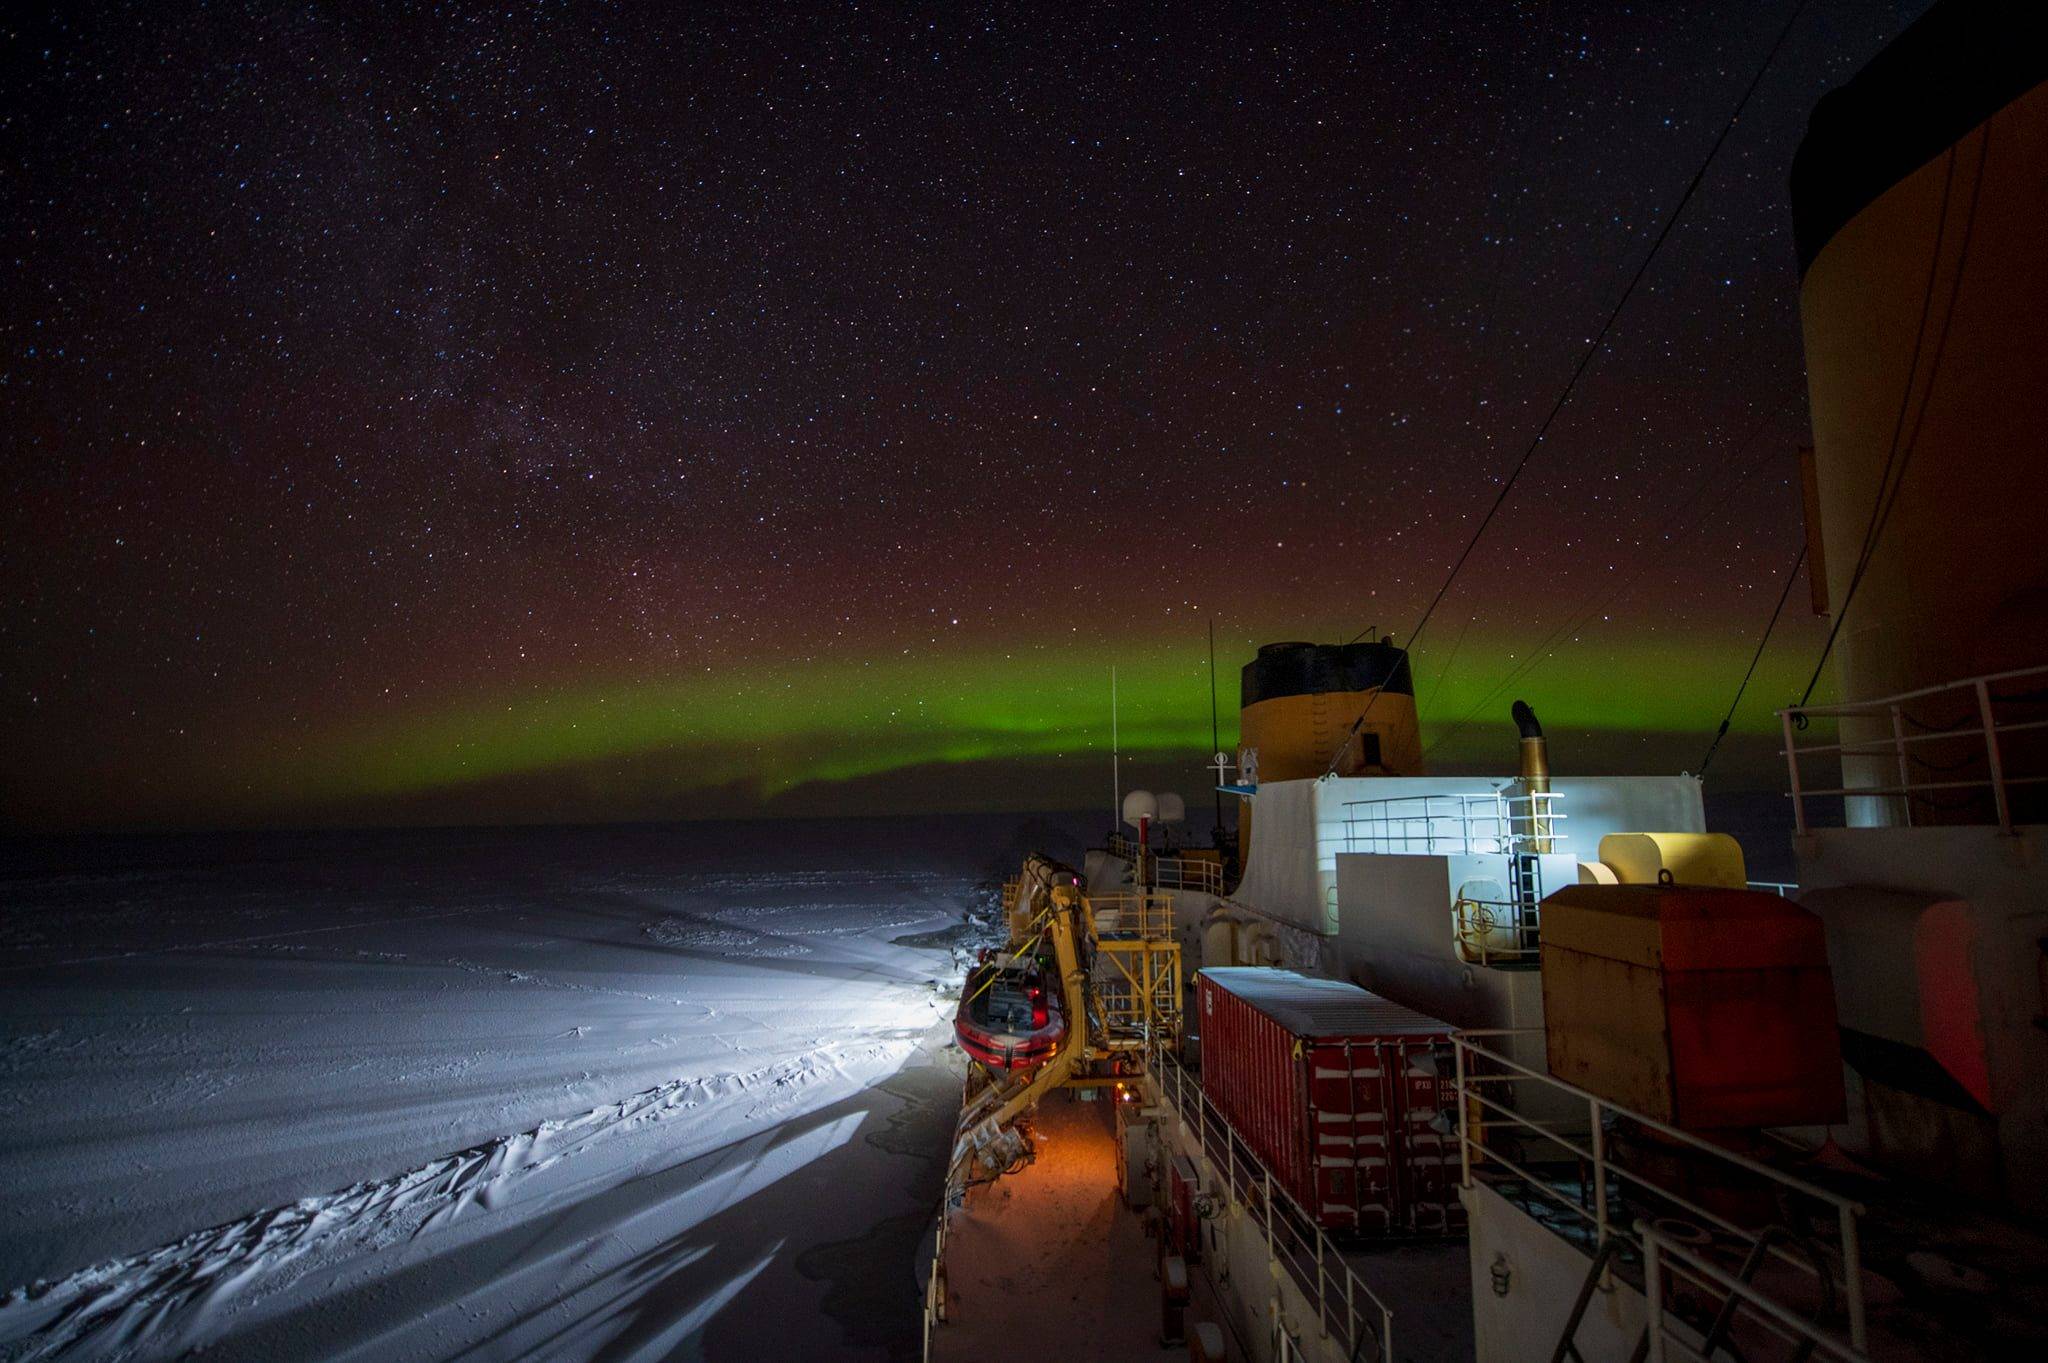 Coast Guard Cutter Polar Star steams under the aurora borealis during its current Arctic deployment patrolling the maritime boundary with Russia. (Petty Officer 1st Class Cynthia Oldham / U.S. Coast Guard)